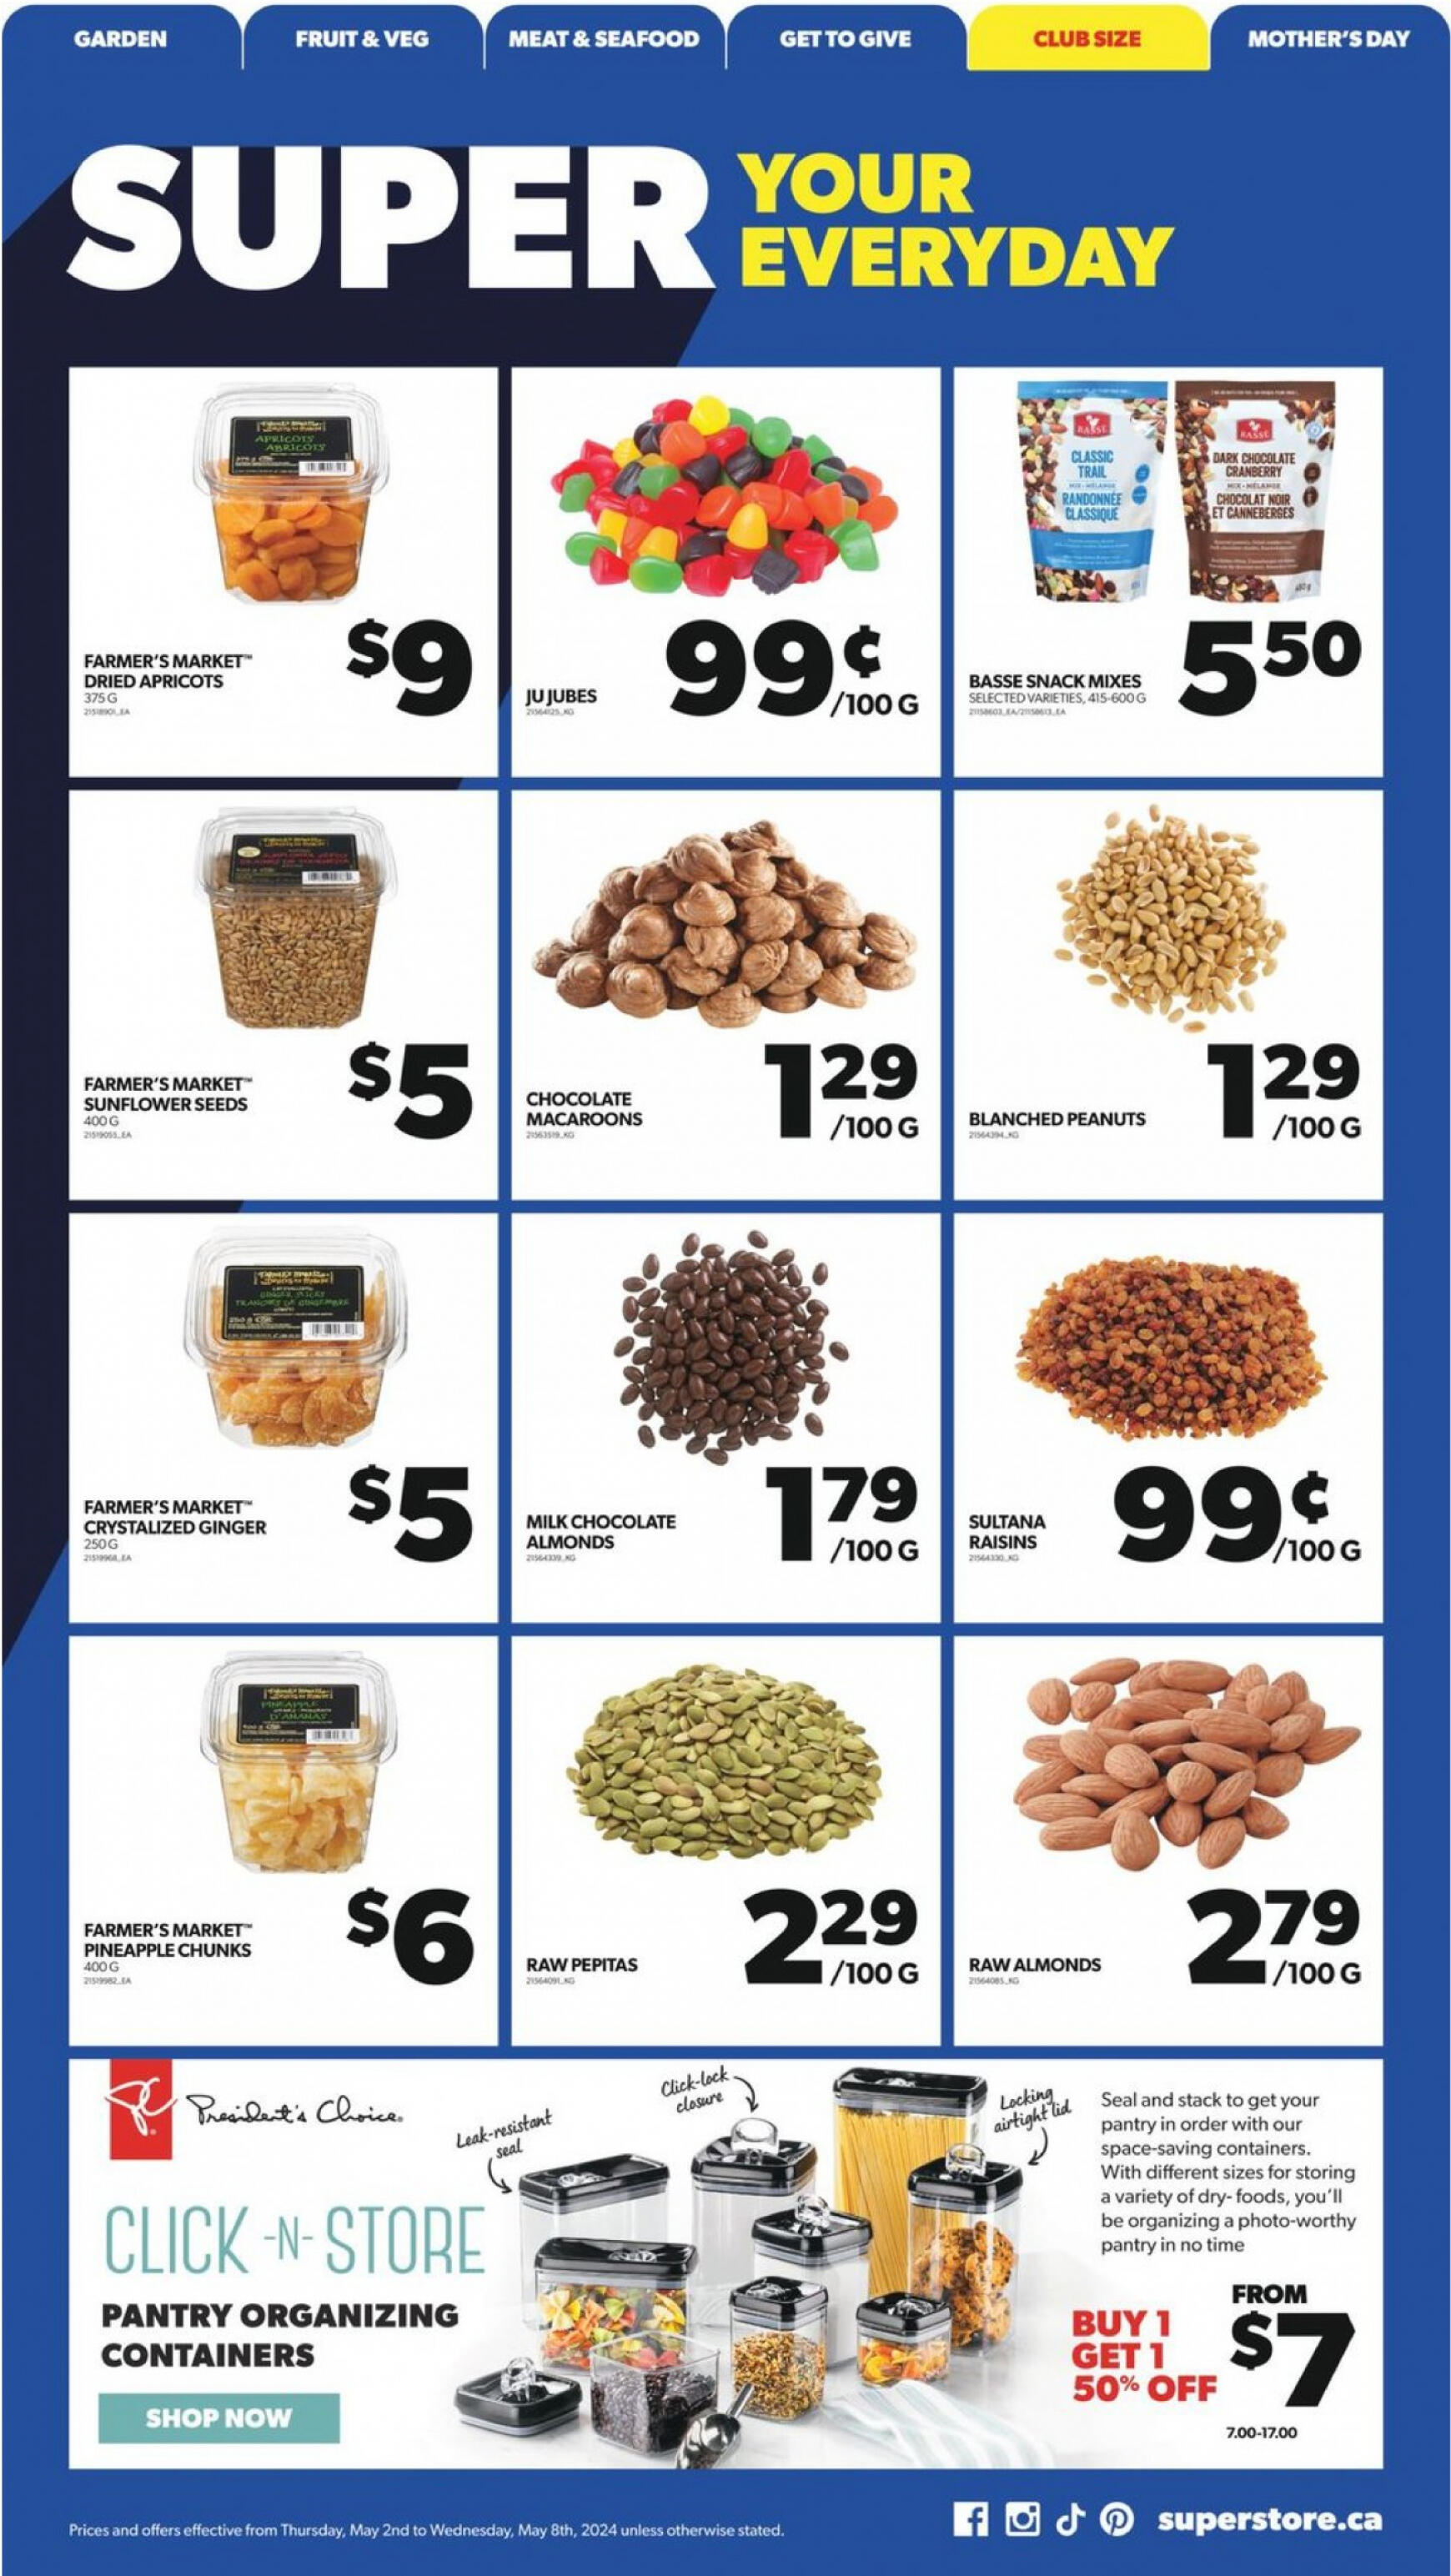 real-canadian-superstore - Real Canadian Superstore flyer current 02.05. - 08.05. - page: 11